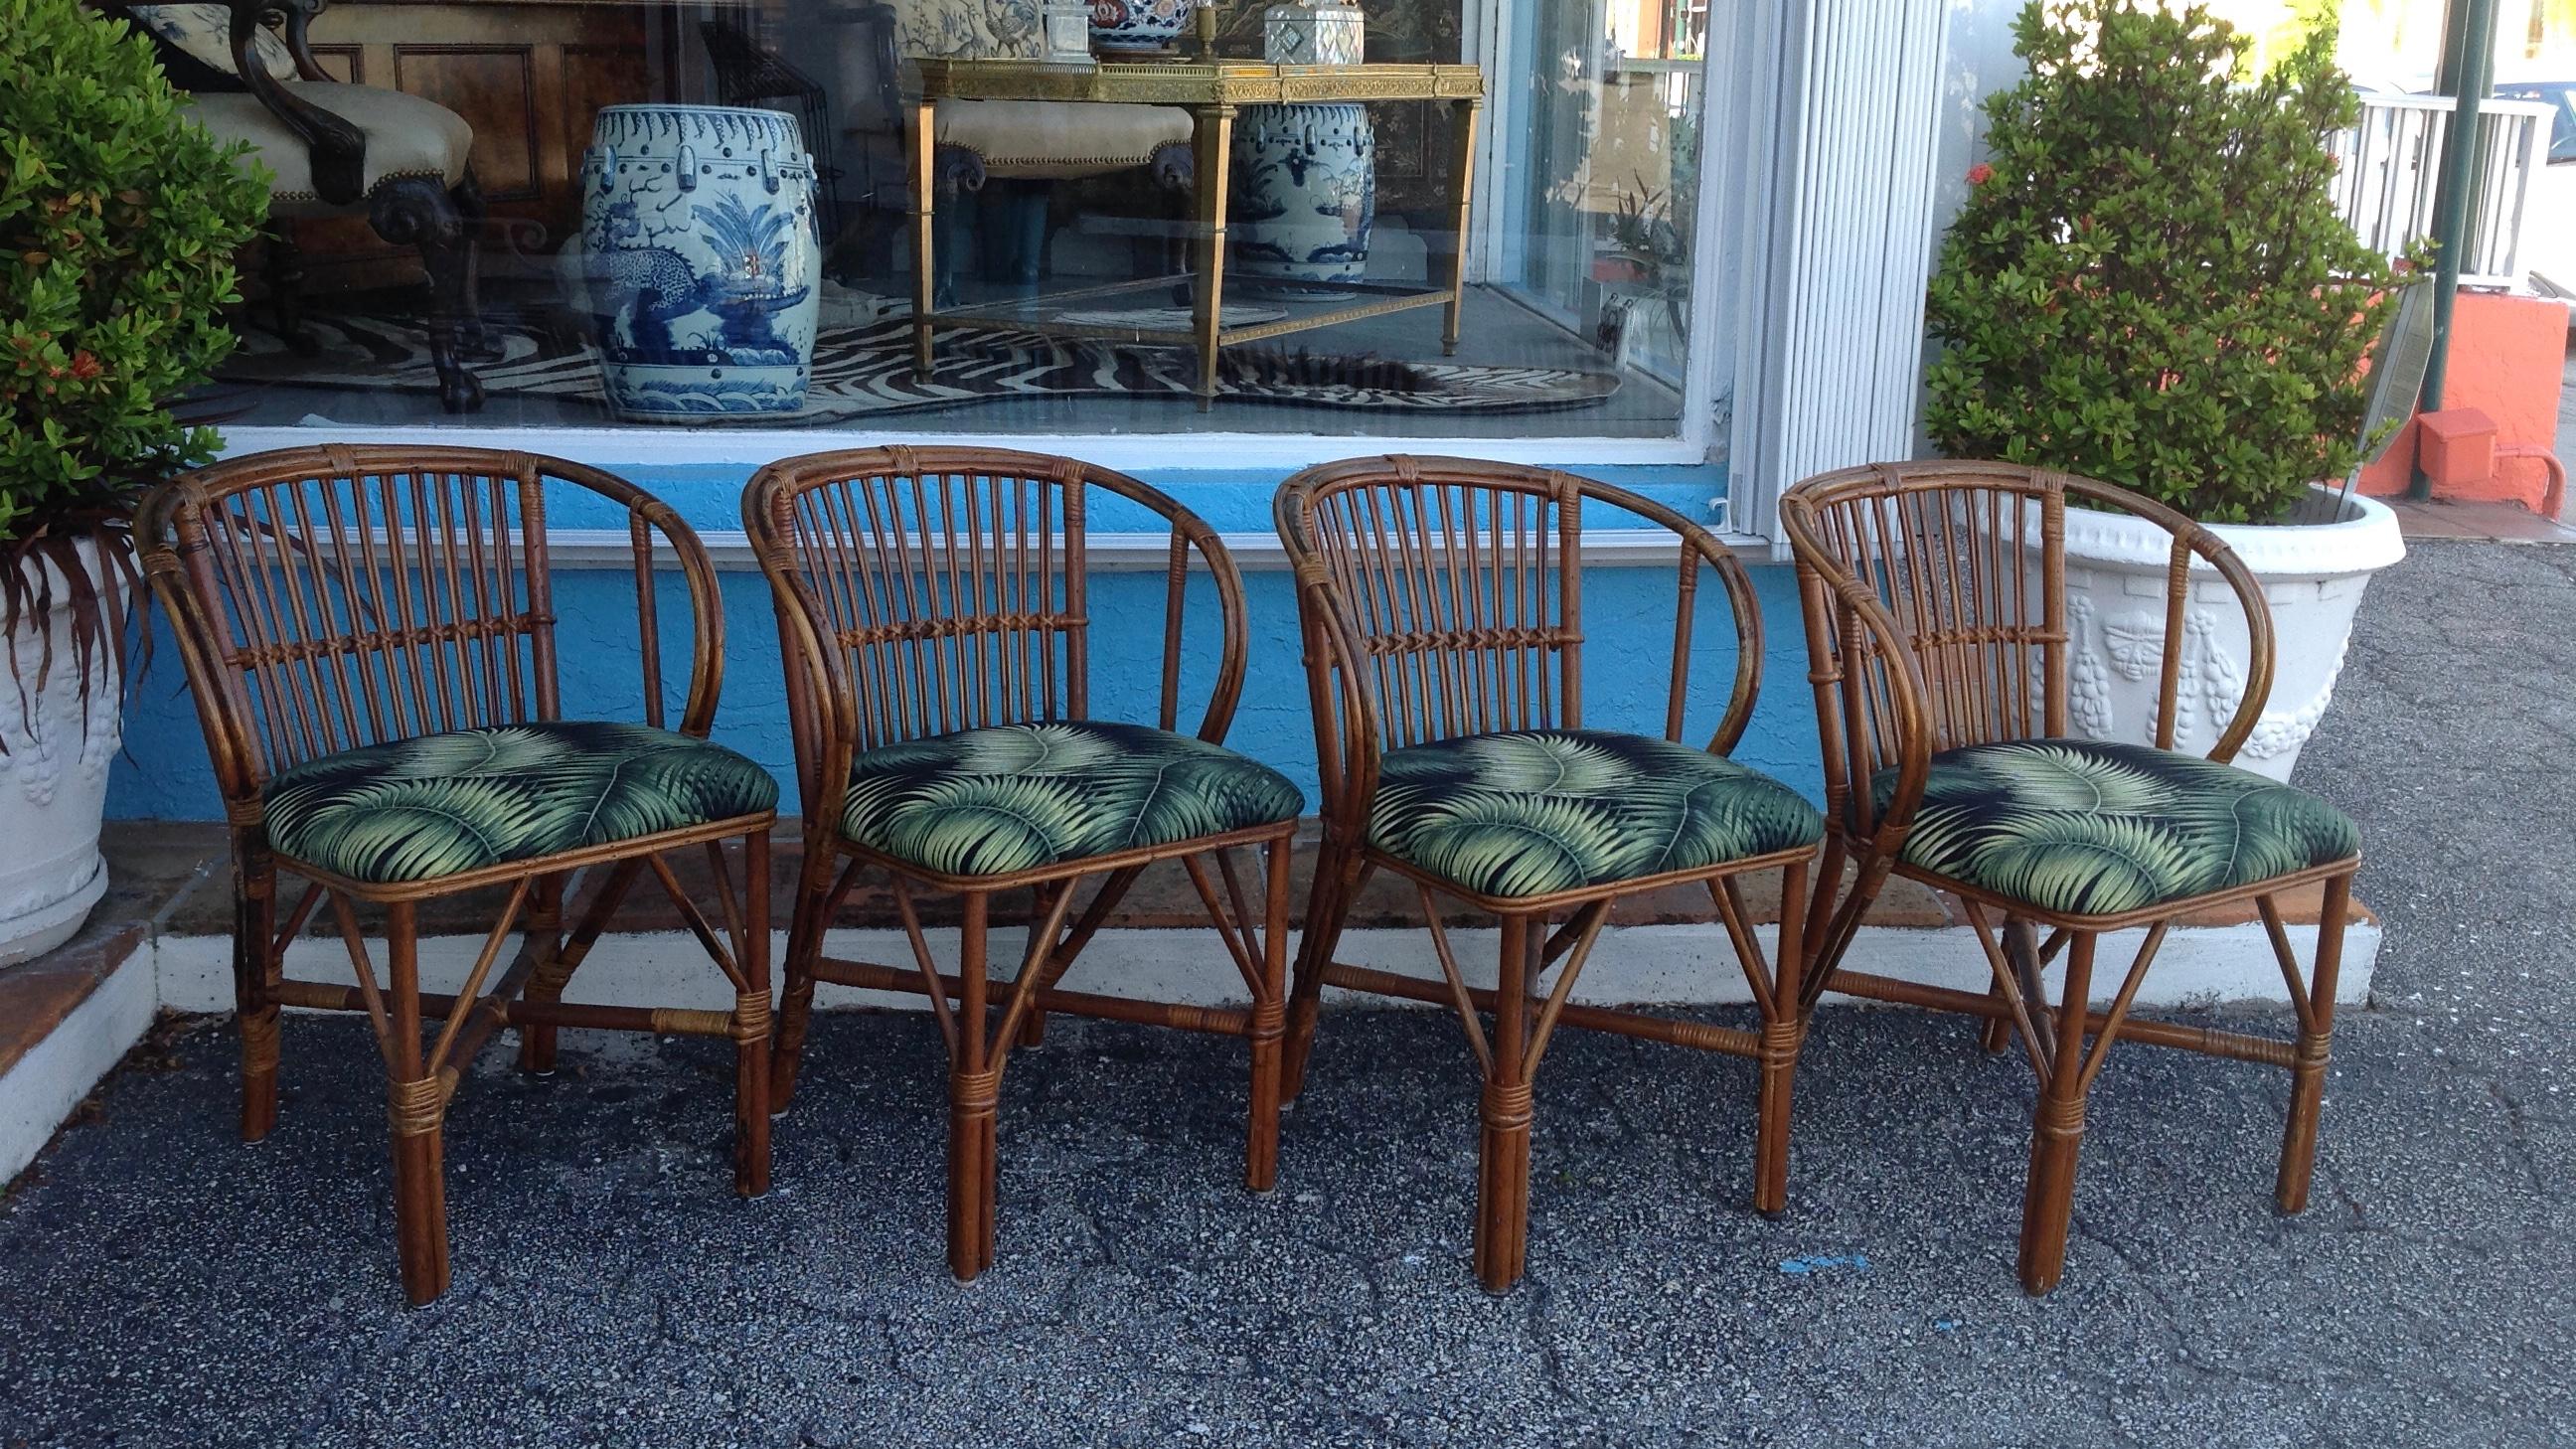 Chic and comfortable design accented with palm frond motif covered seat cushions.
Quality satin finish.